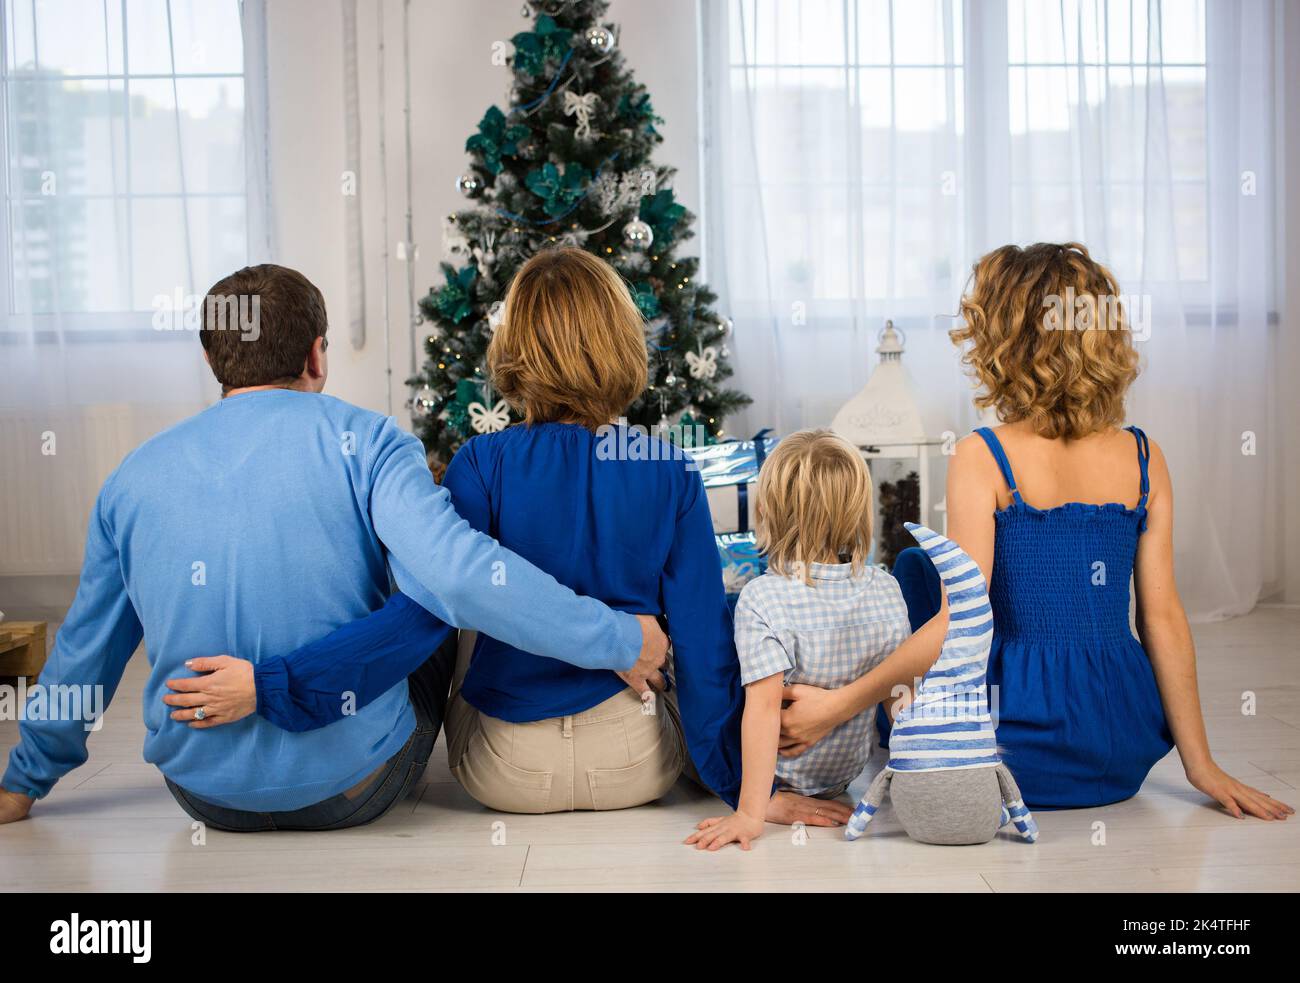 Happy new year. Christmas with family. Rear view of parents, little son, daughter. Dressed in shades of blue. concept of friendly relations, unity, su Stock Photo